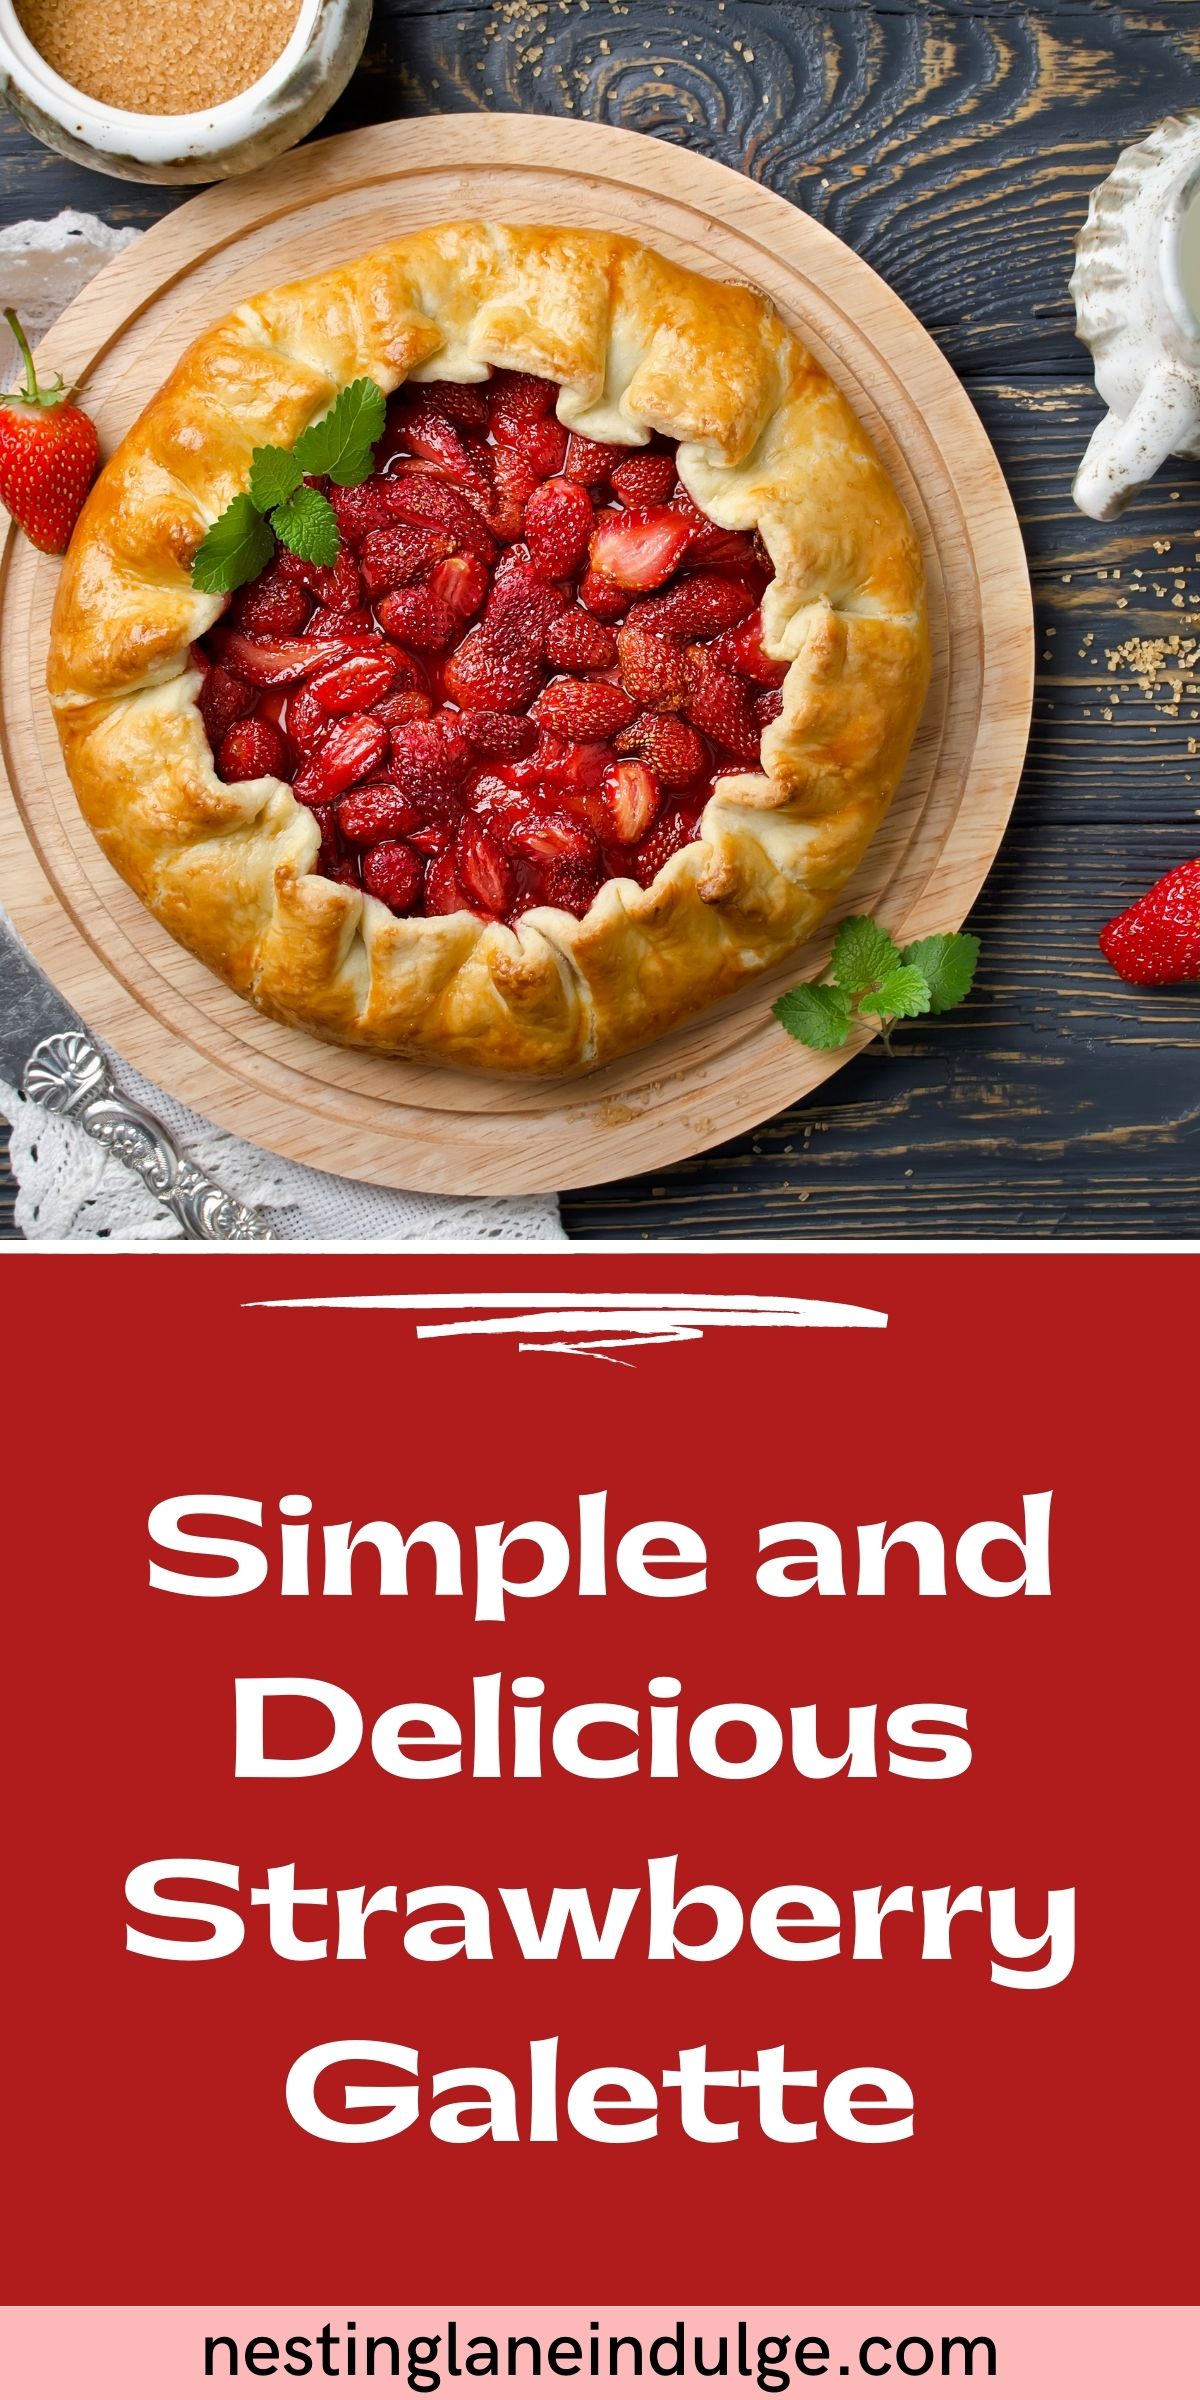 Graphic for Pinterest of Simple and Delicious Strawberry Galette Recipe.